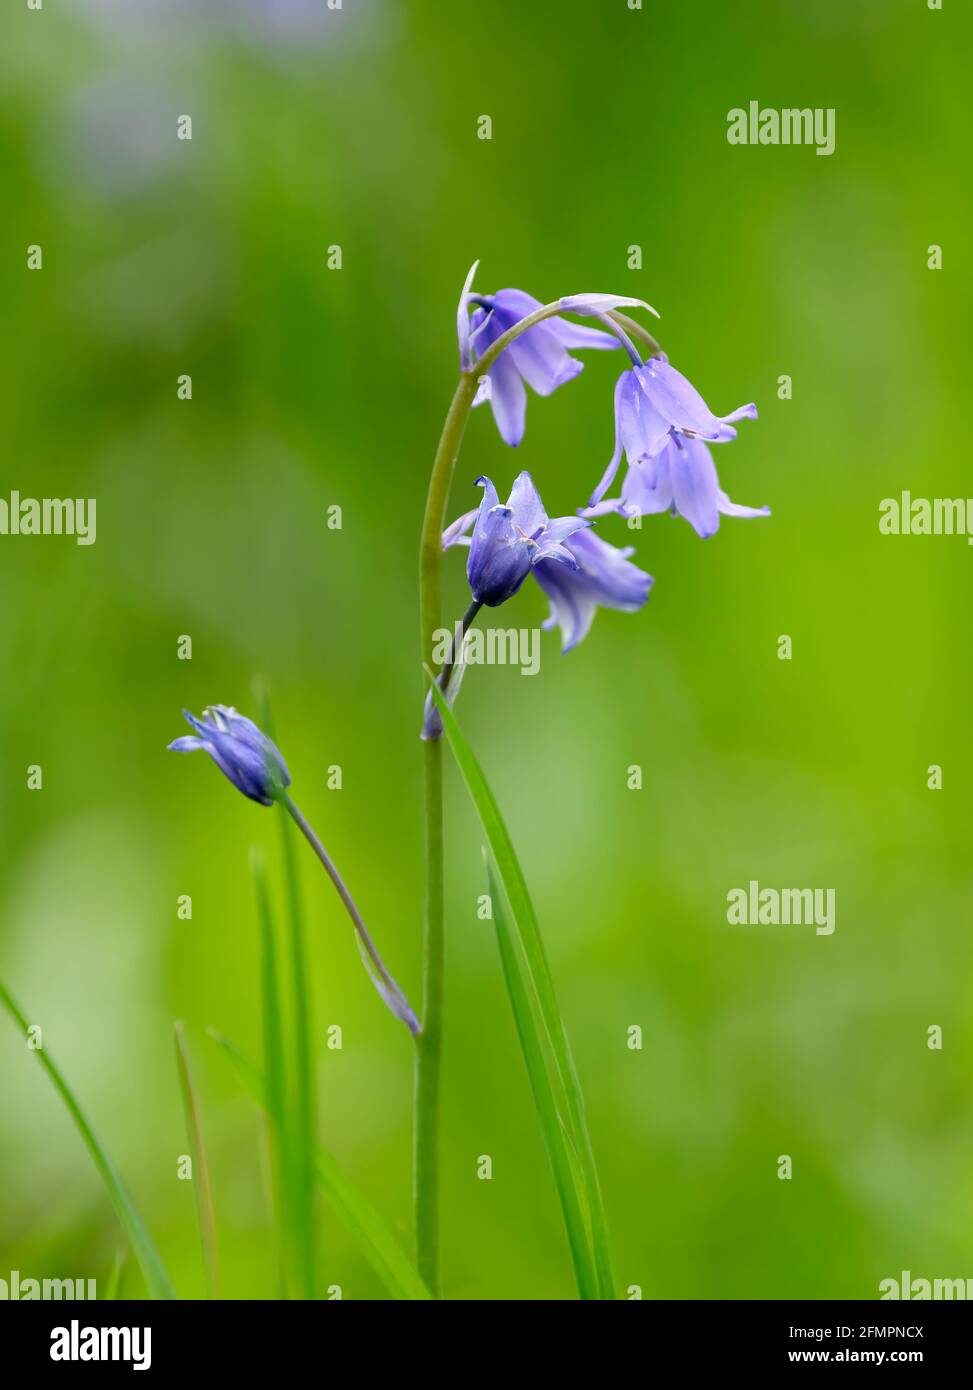 Solitary Bluebell flower (Hyacinthoides non-scripta) photographed against a blurred foliage background Stock Photo